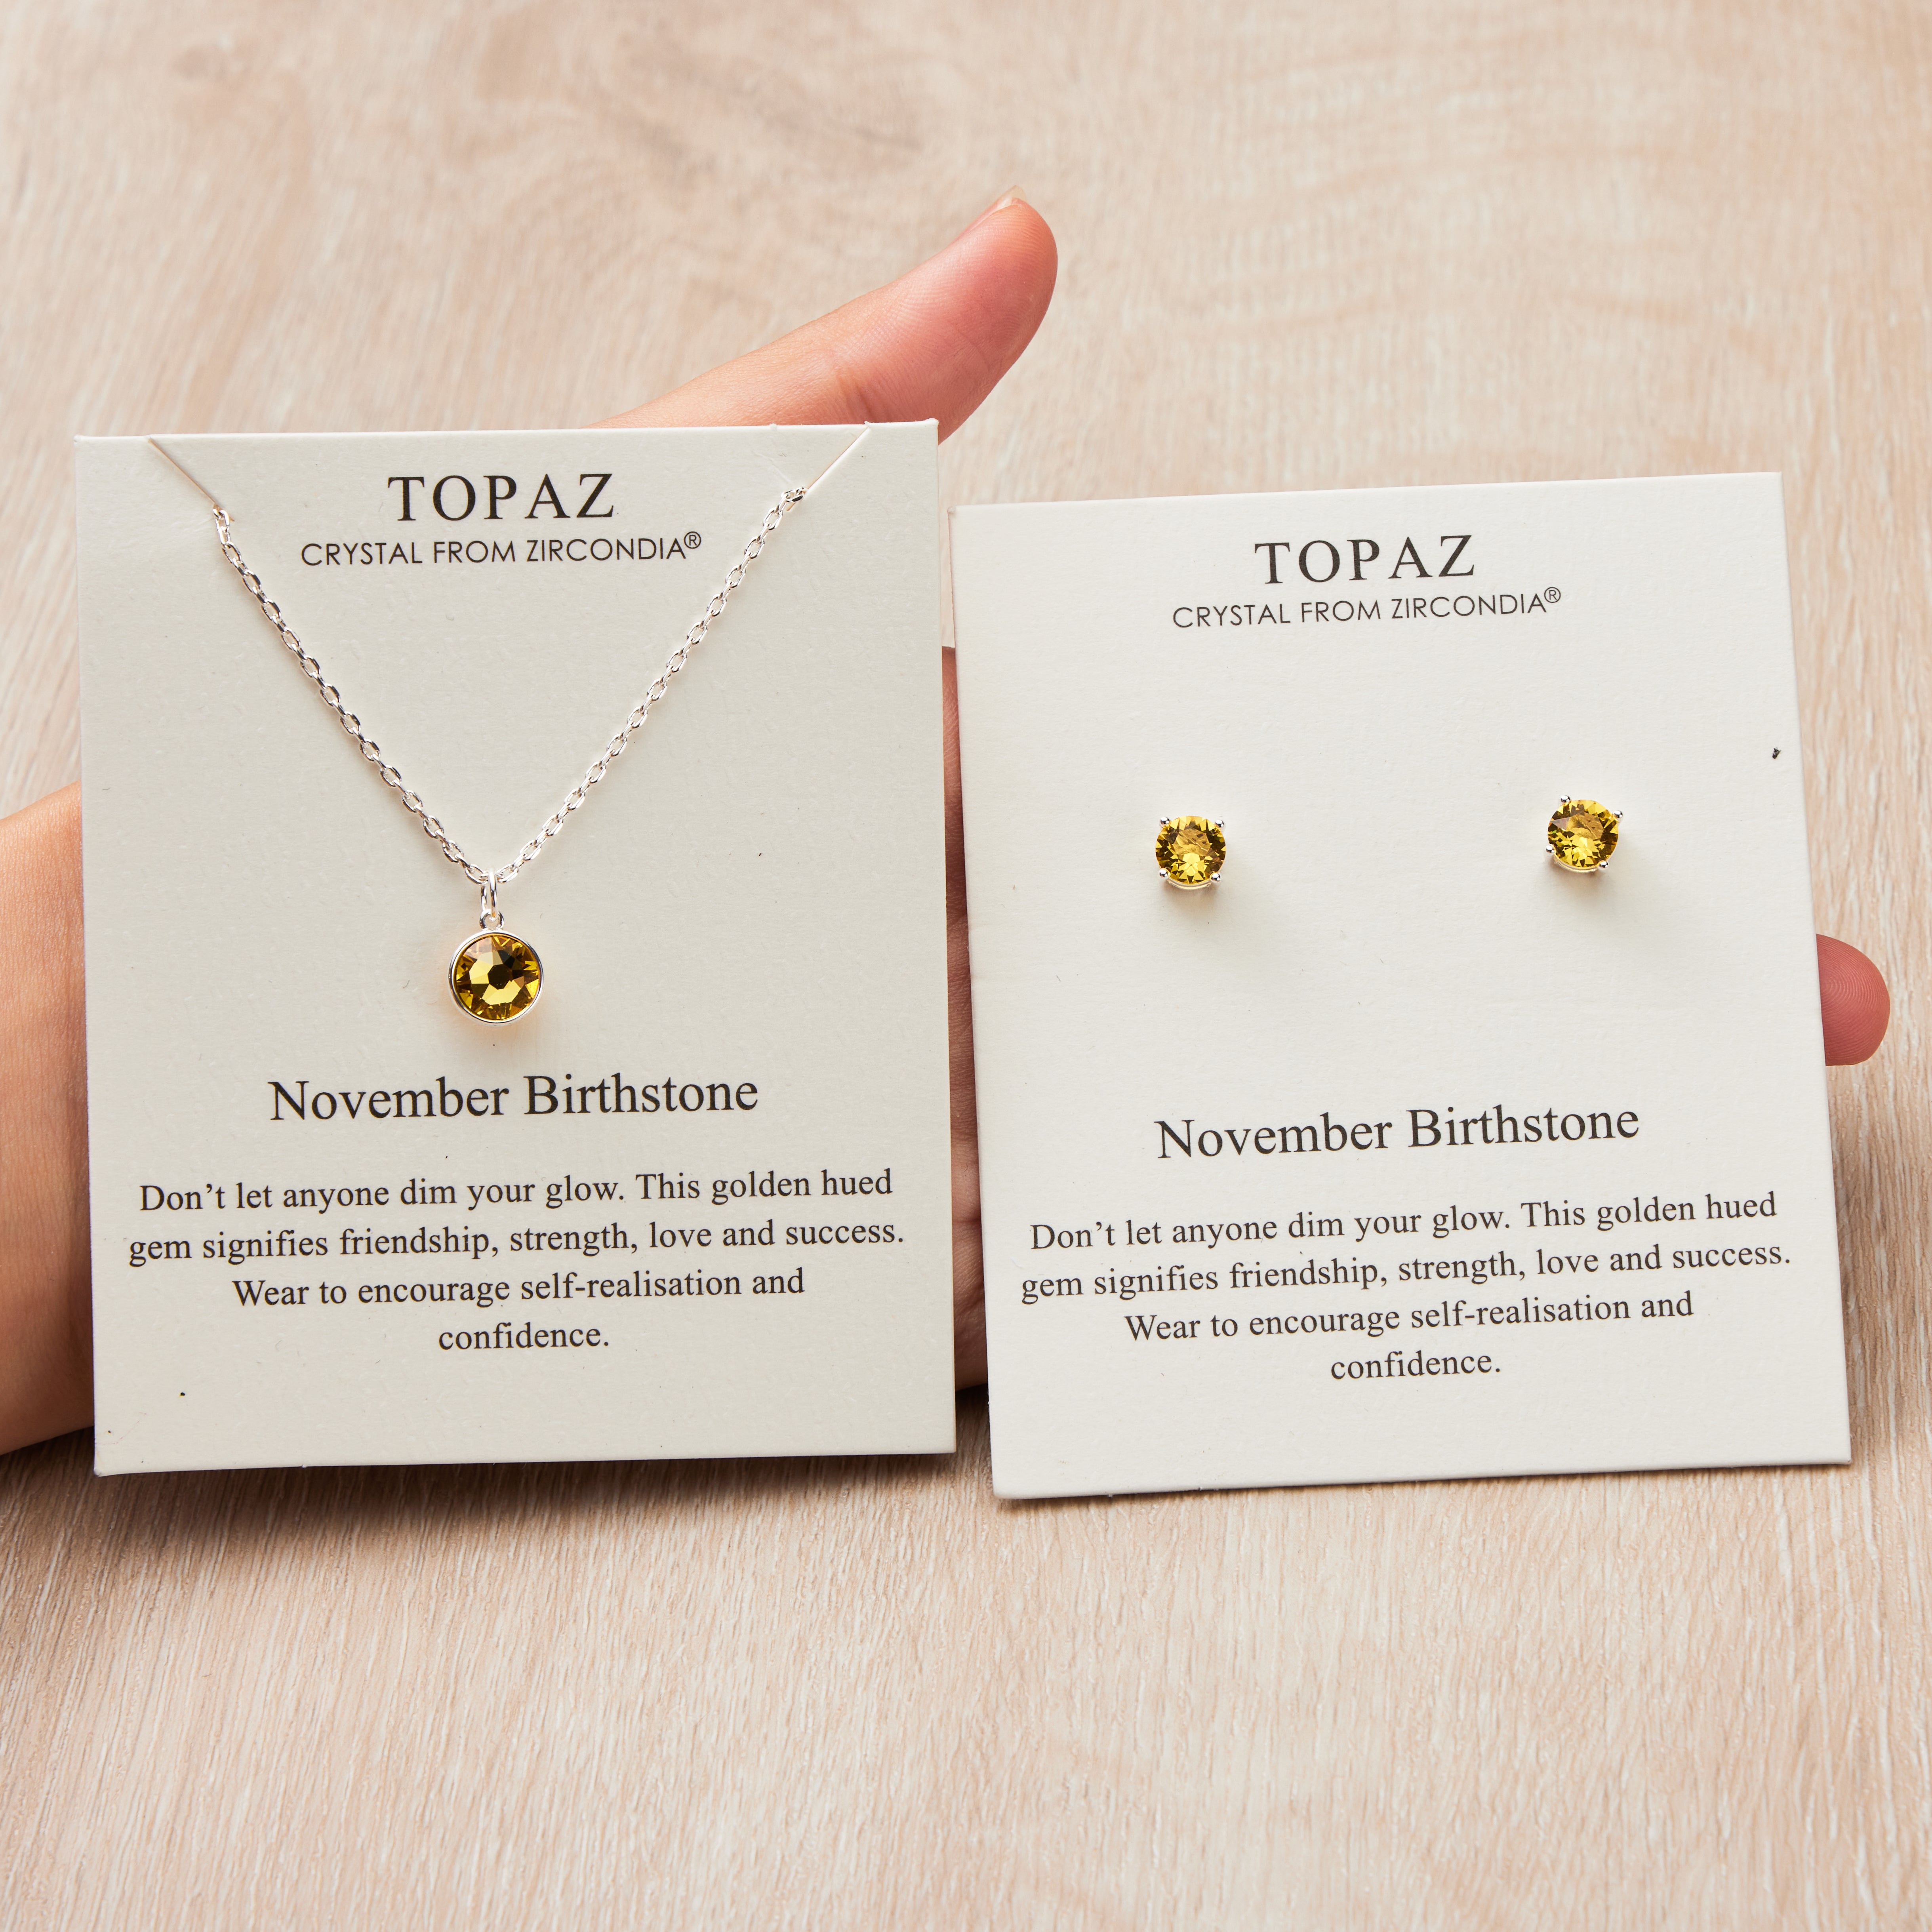 November (Topaz) Birthstone Necklace & Earrings Set Created with Zircondia® Crystals